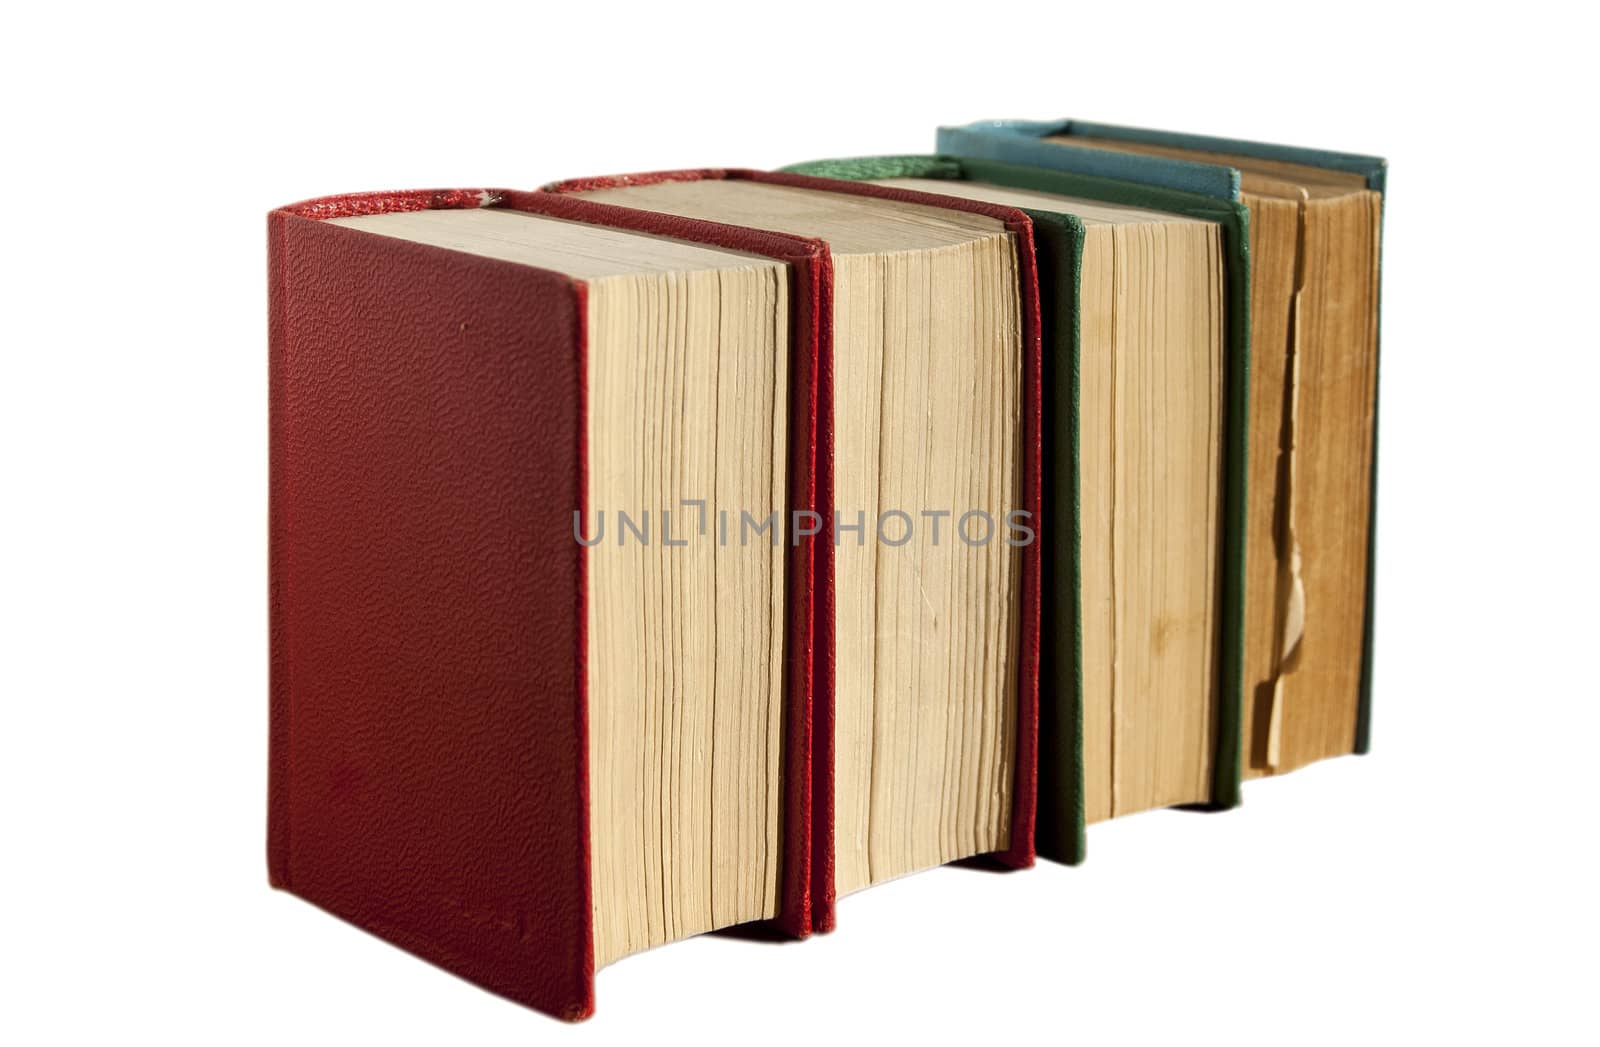 Four old books in row isolated on white